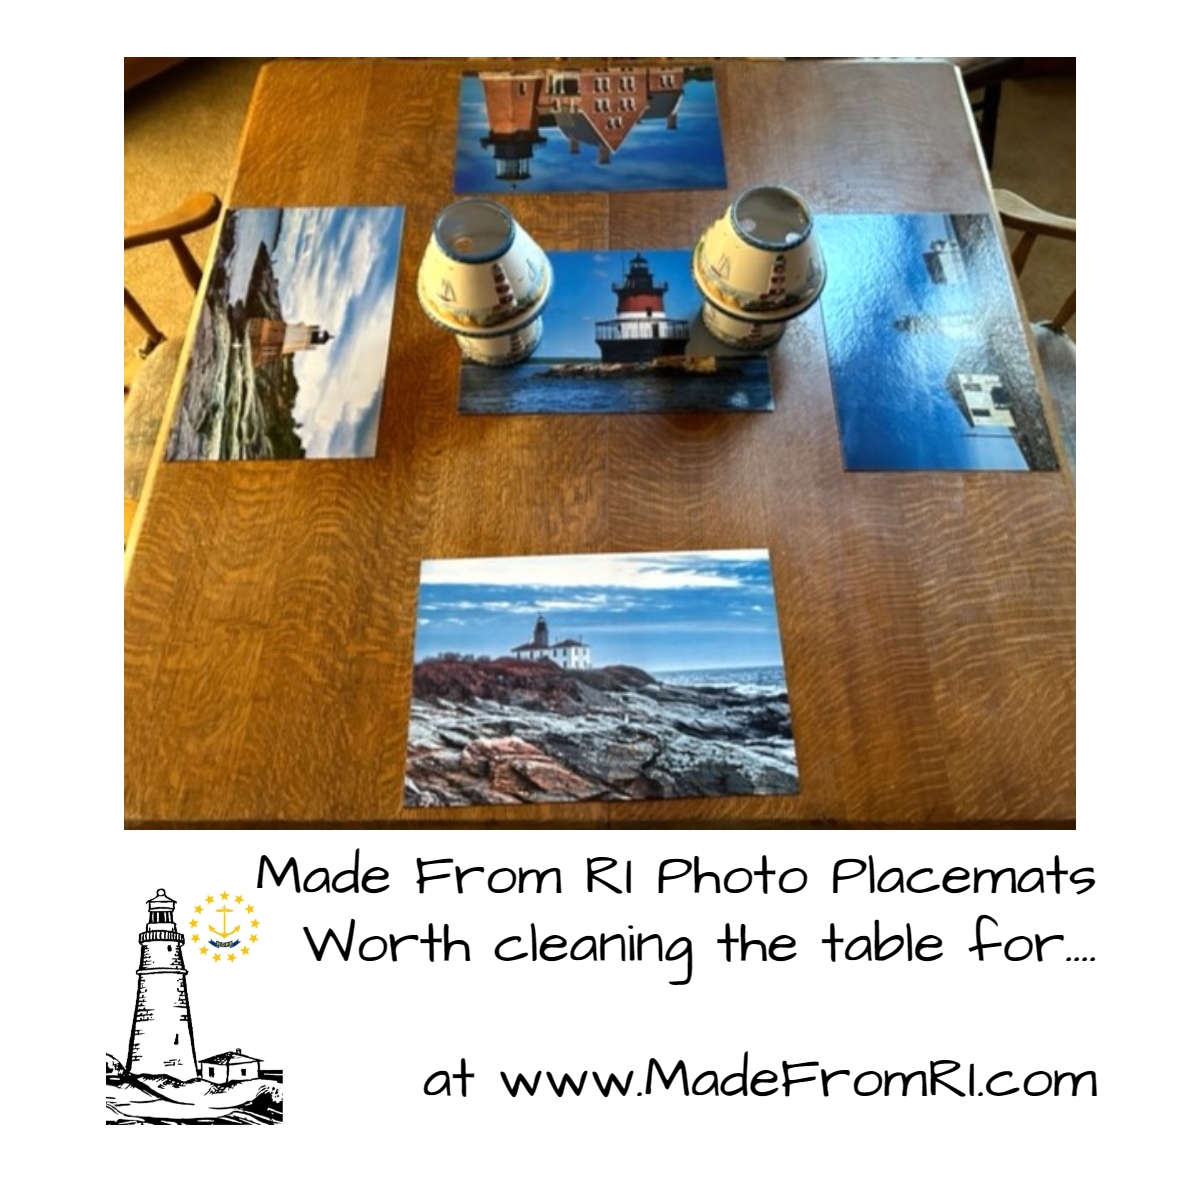 Made From RI Photo Placemats